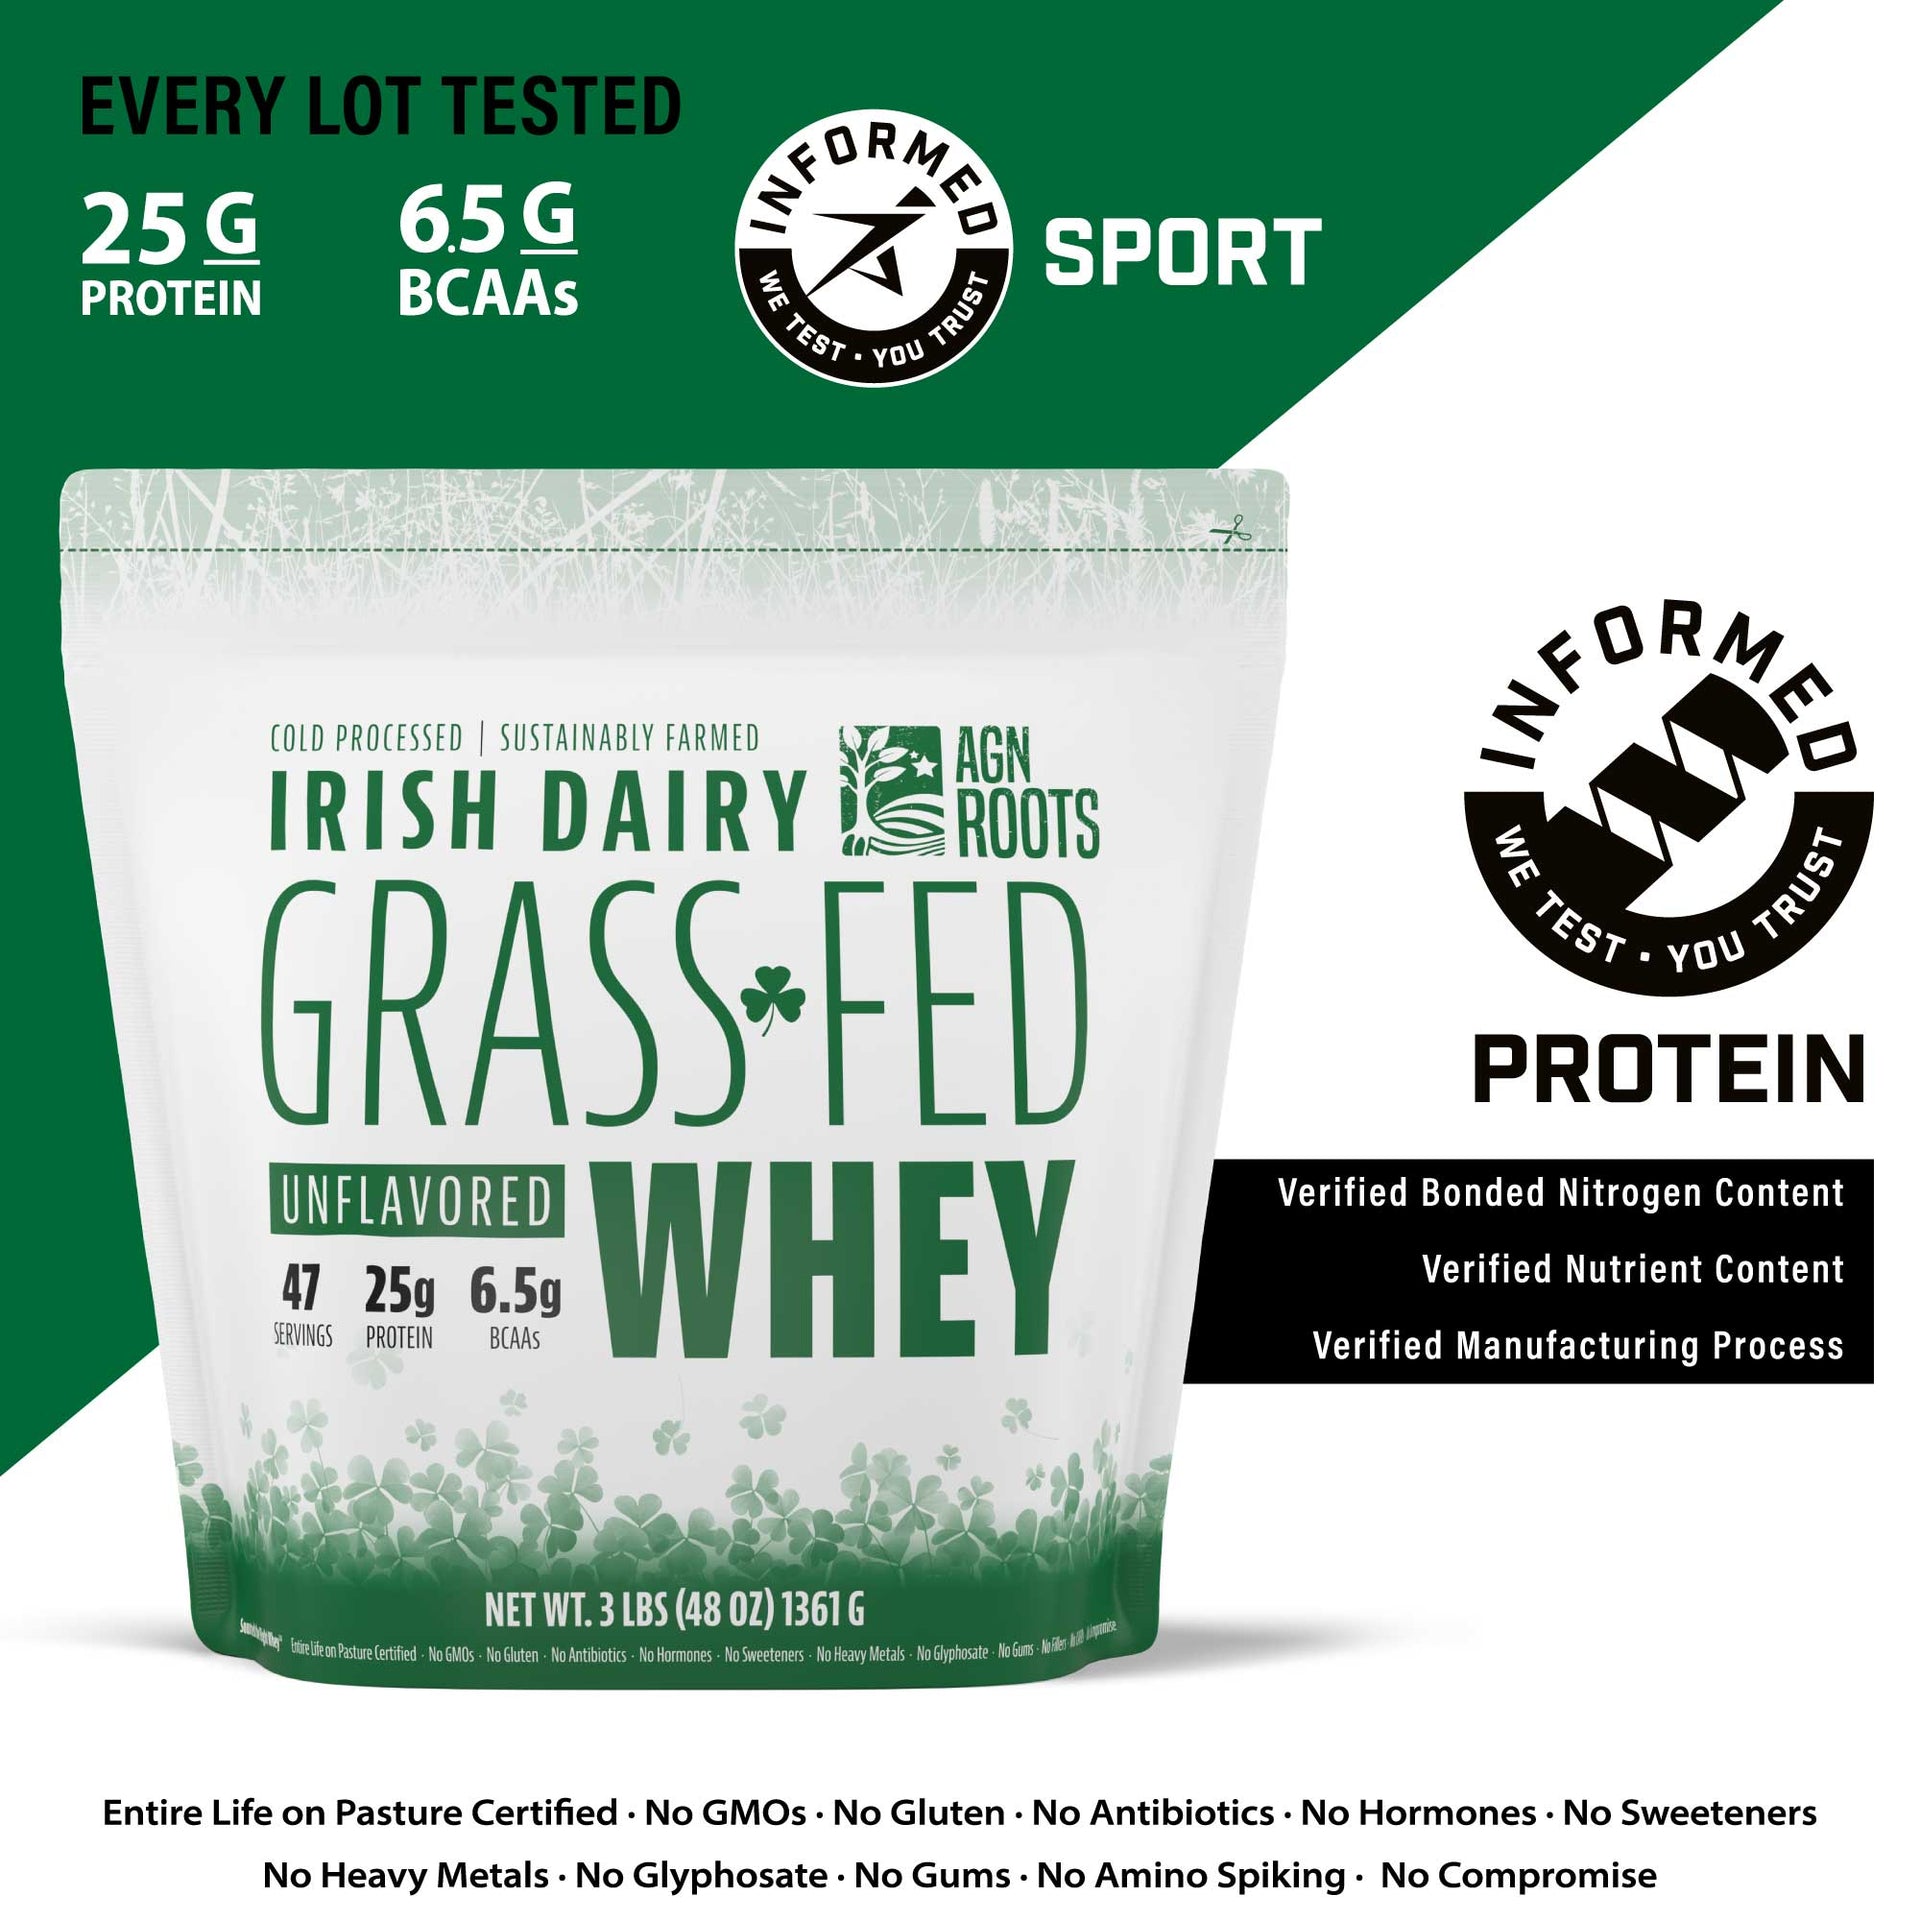 AGN Roots Certified with Informed Sport Informed Protein - Every Batch Tested NCAA Approved Whey Protein